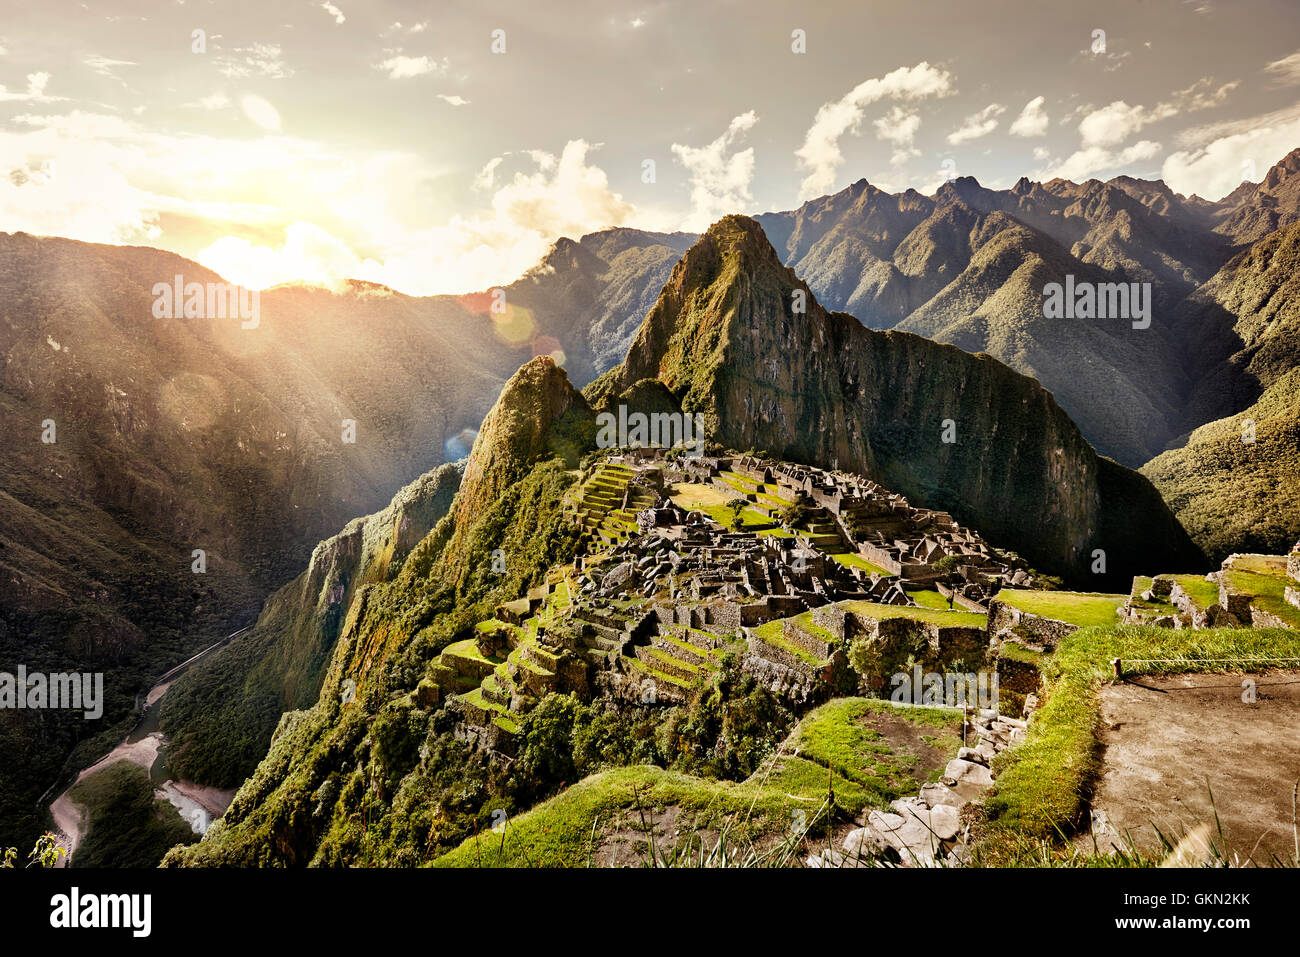 MACHU PICCHU, PERU - MAY 31, 2015: View of the ancient Inca City of Machu Picchu. The 15-th century Inca site.'Lost city of the Stock Photo